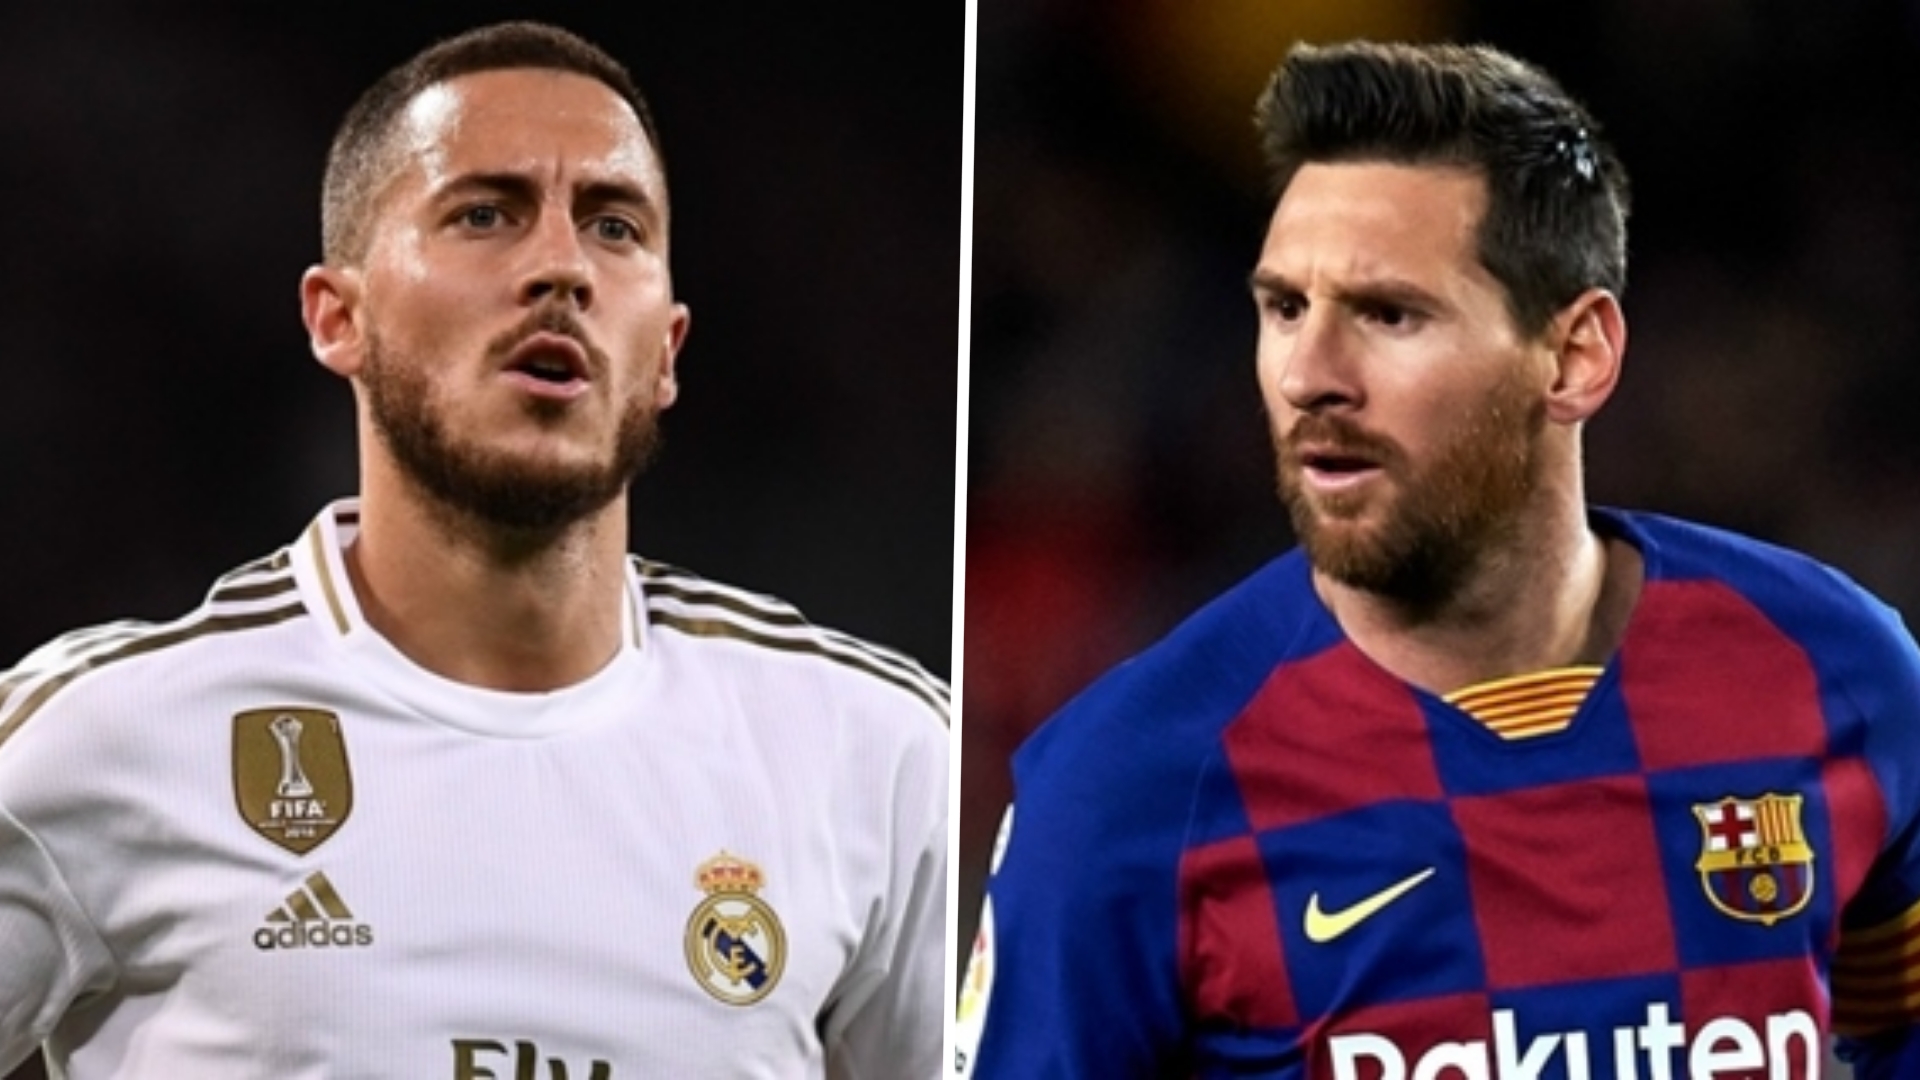 ‘Hazard’s best level puts him alongside Messi’ – Morientes expecting more from Real Madrid stars